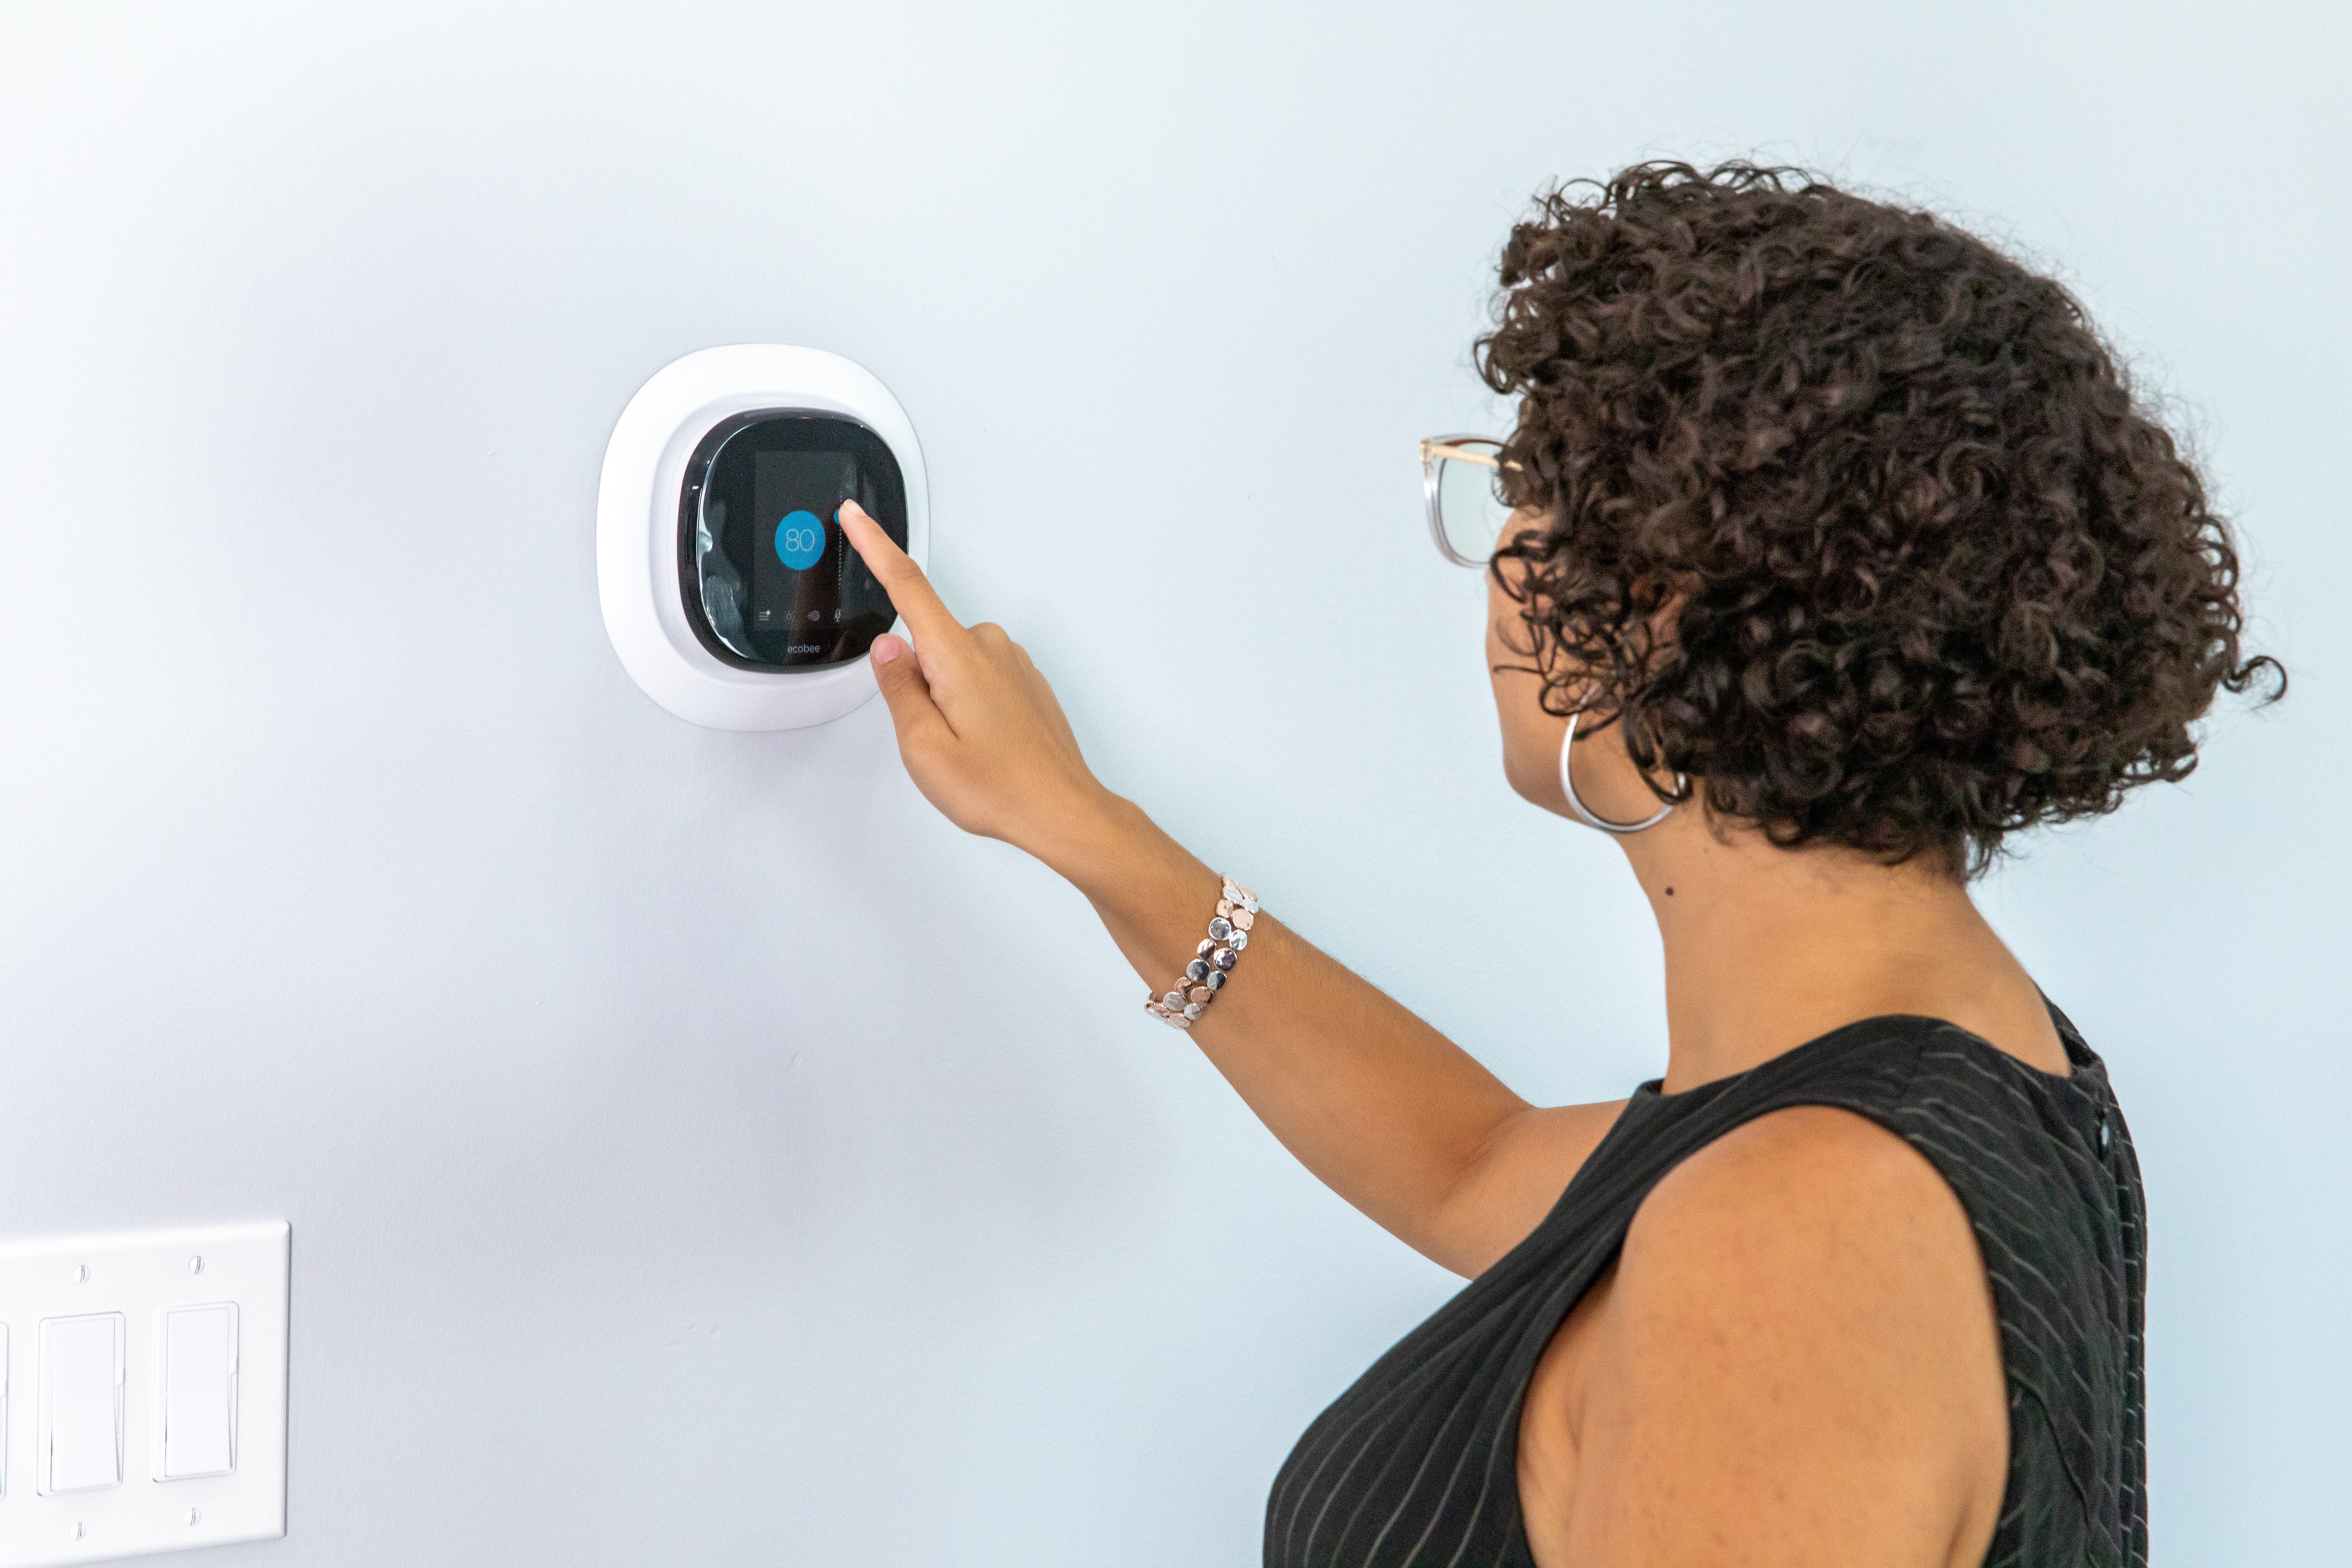 A woman adjusting an Ecobee Smart thermostat